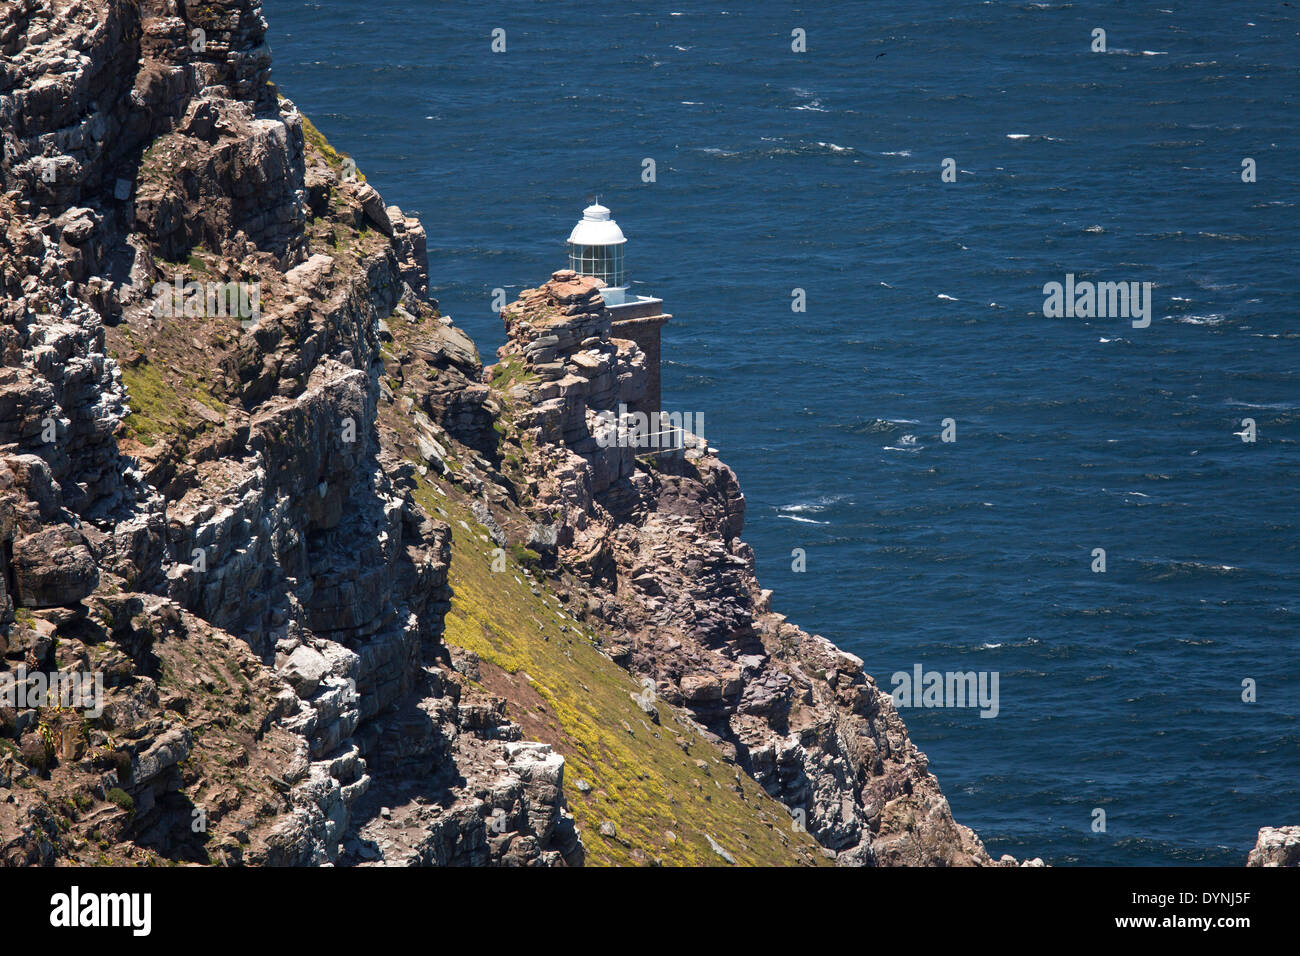 Cape of Good Hope Lighthouse, Cape Point, Cape Town, Western Cape, South Africa Stock Photo